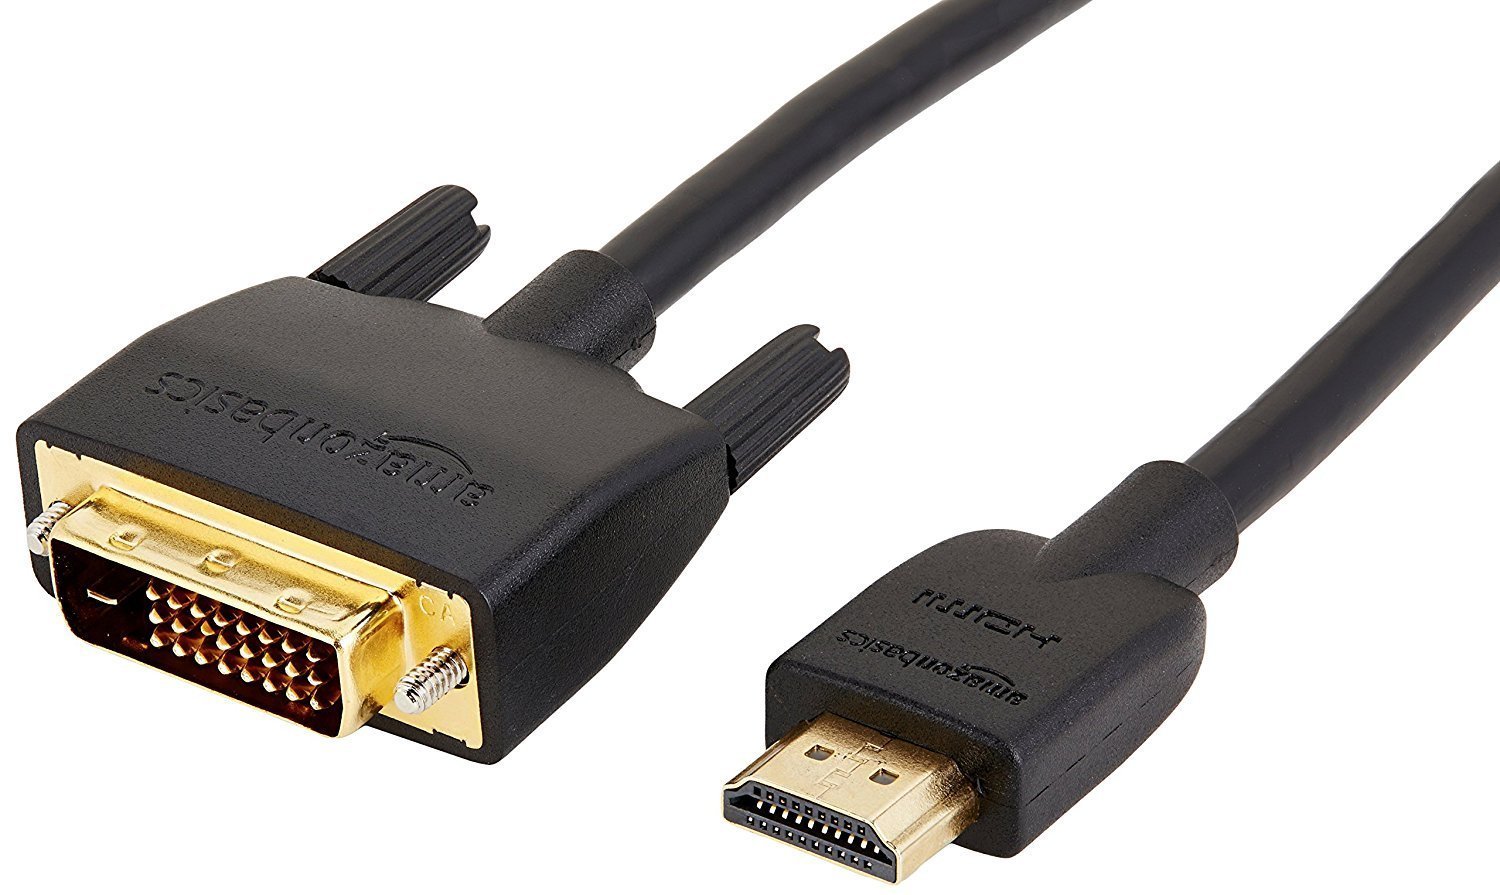 Which Cable Is Usually Used To Connect A Monitor To A Computer?